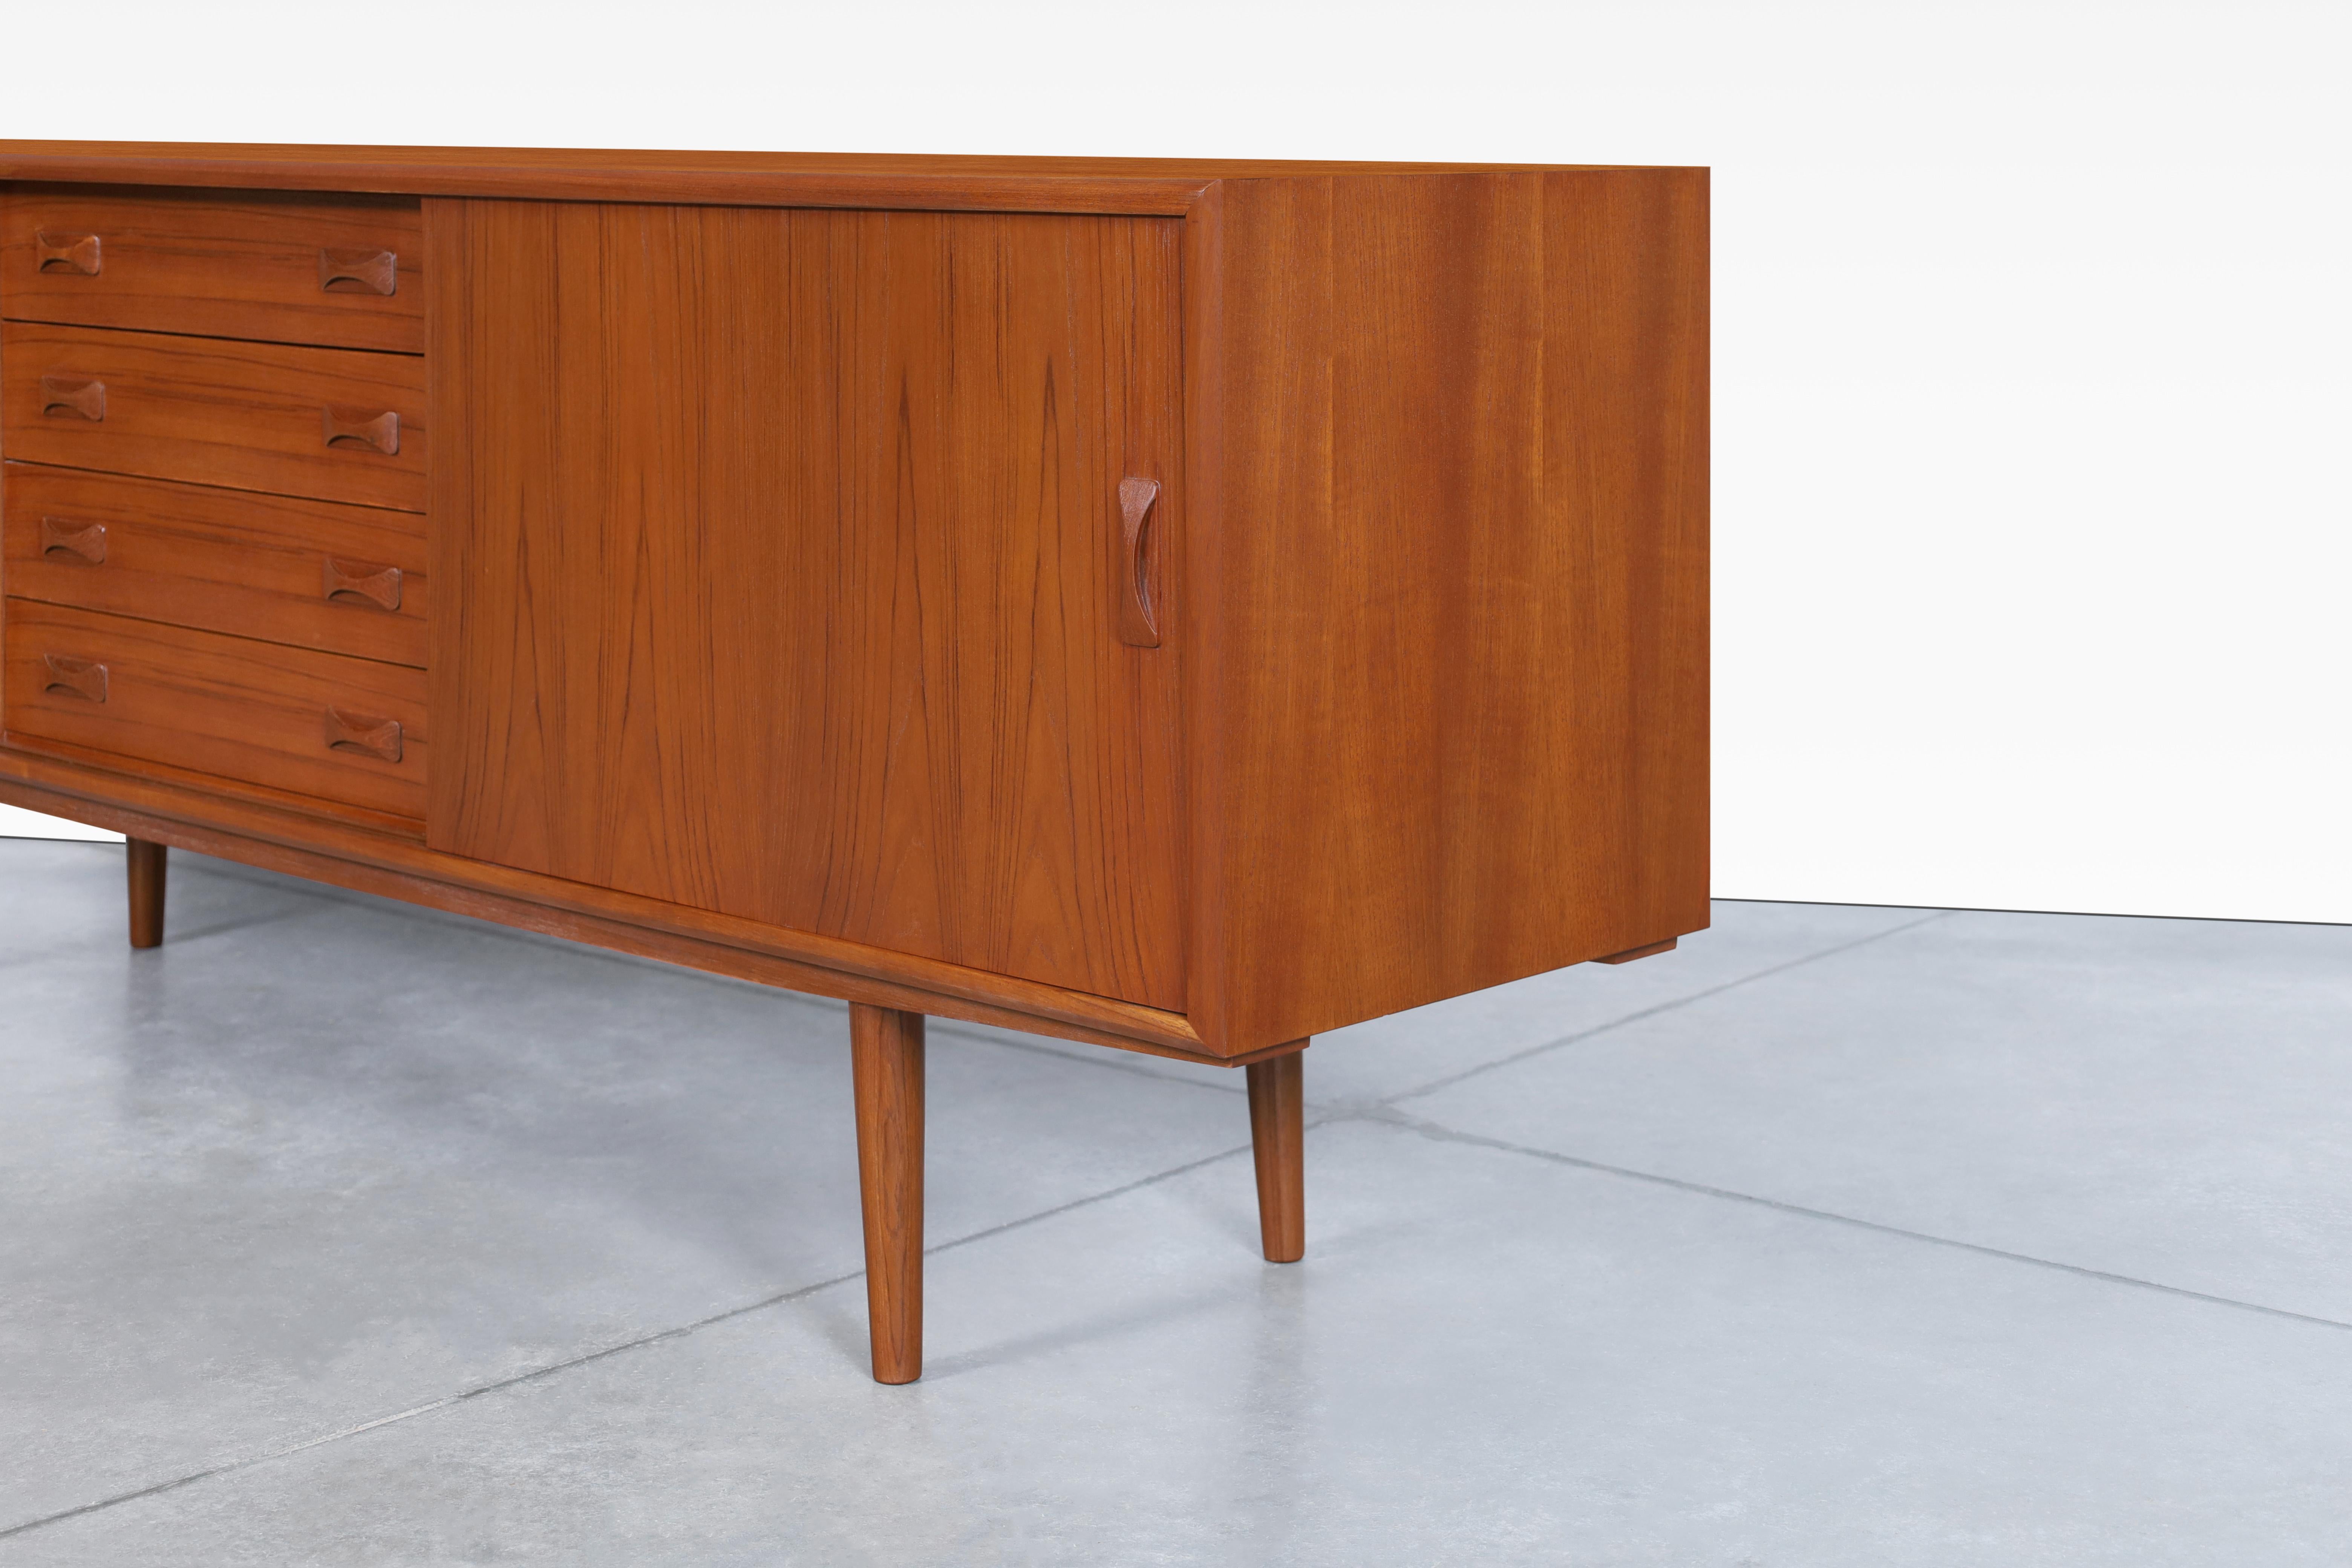 Danish Modern Teak Credenza by Clausen and Son In Excellent Condition For Sale In North Hollywood, CA